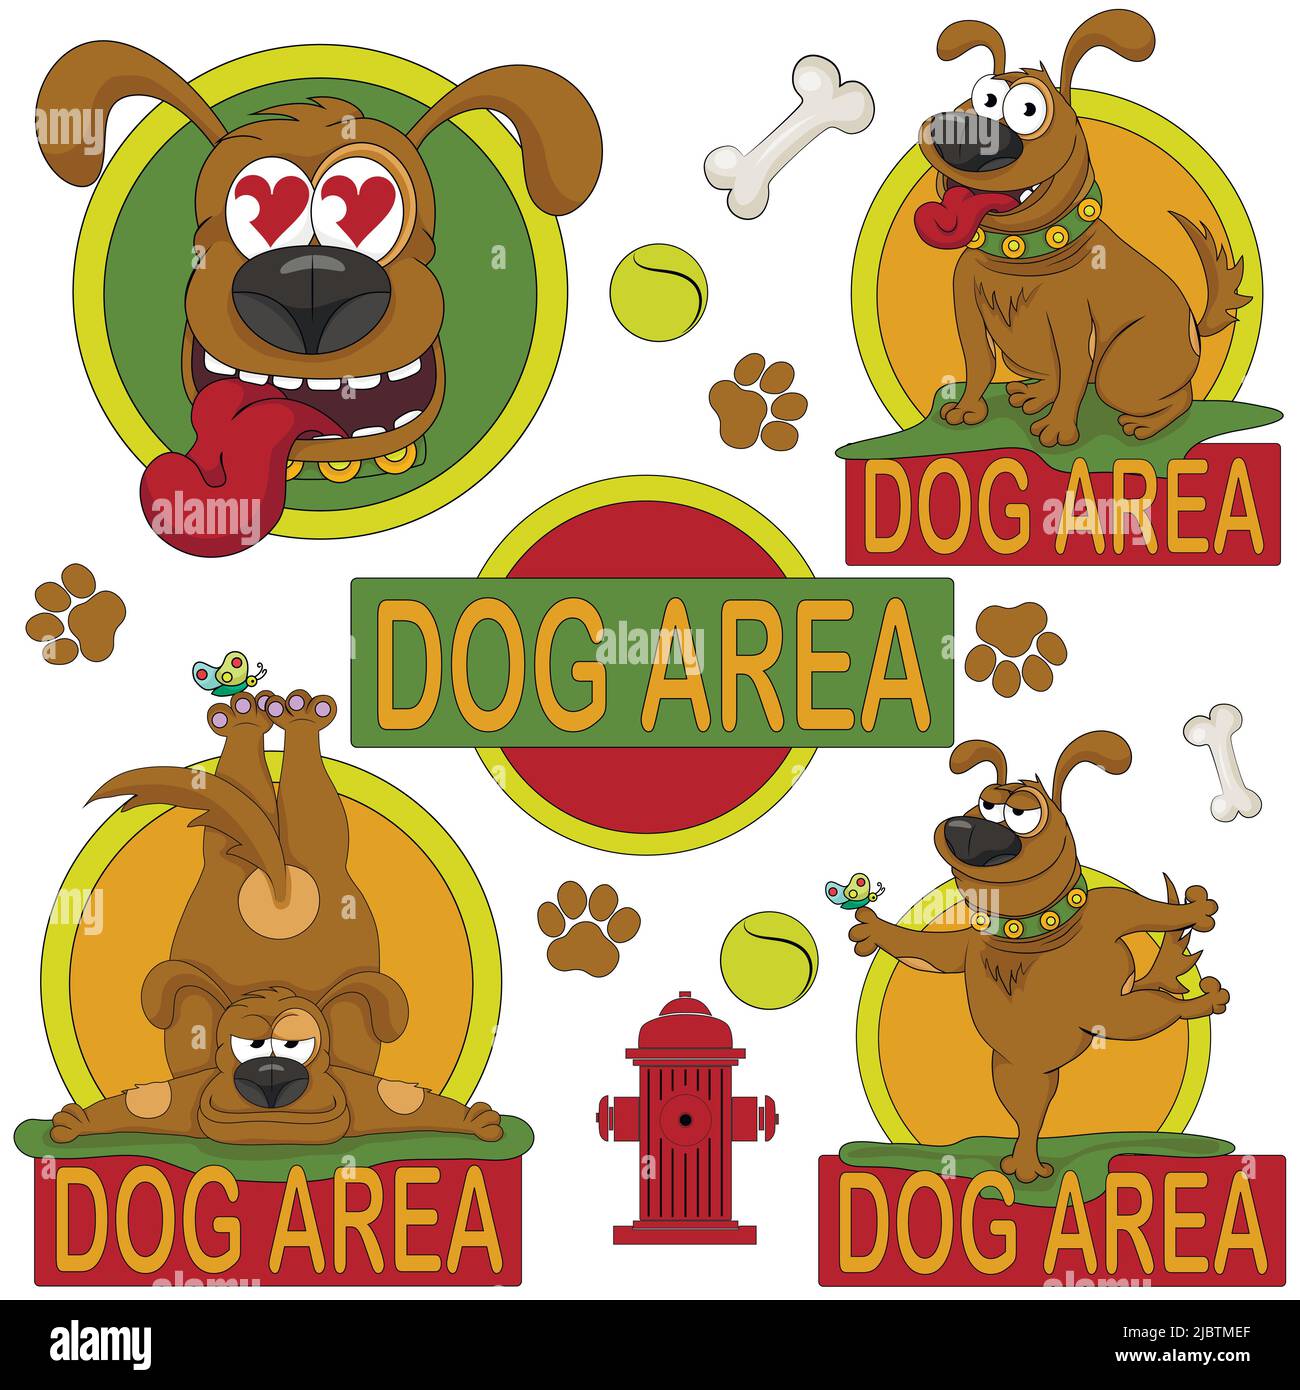 Dog area. Vector illustration to indicate areas of land that are intended for dogs. Set of colored icons and stickers. Stock Vector